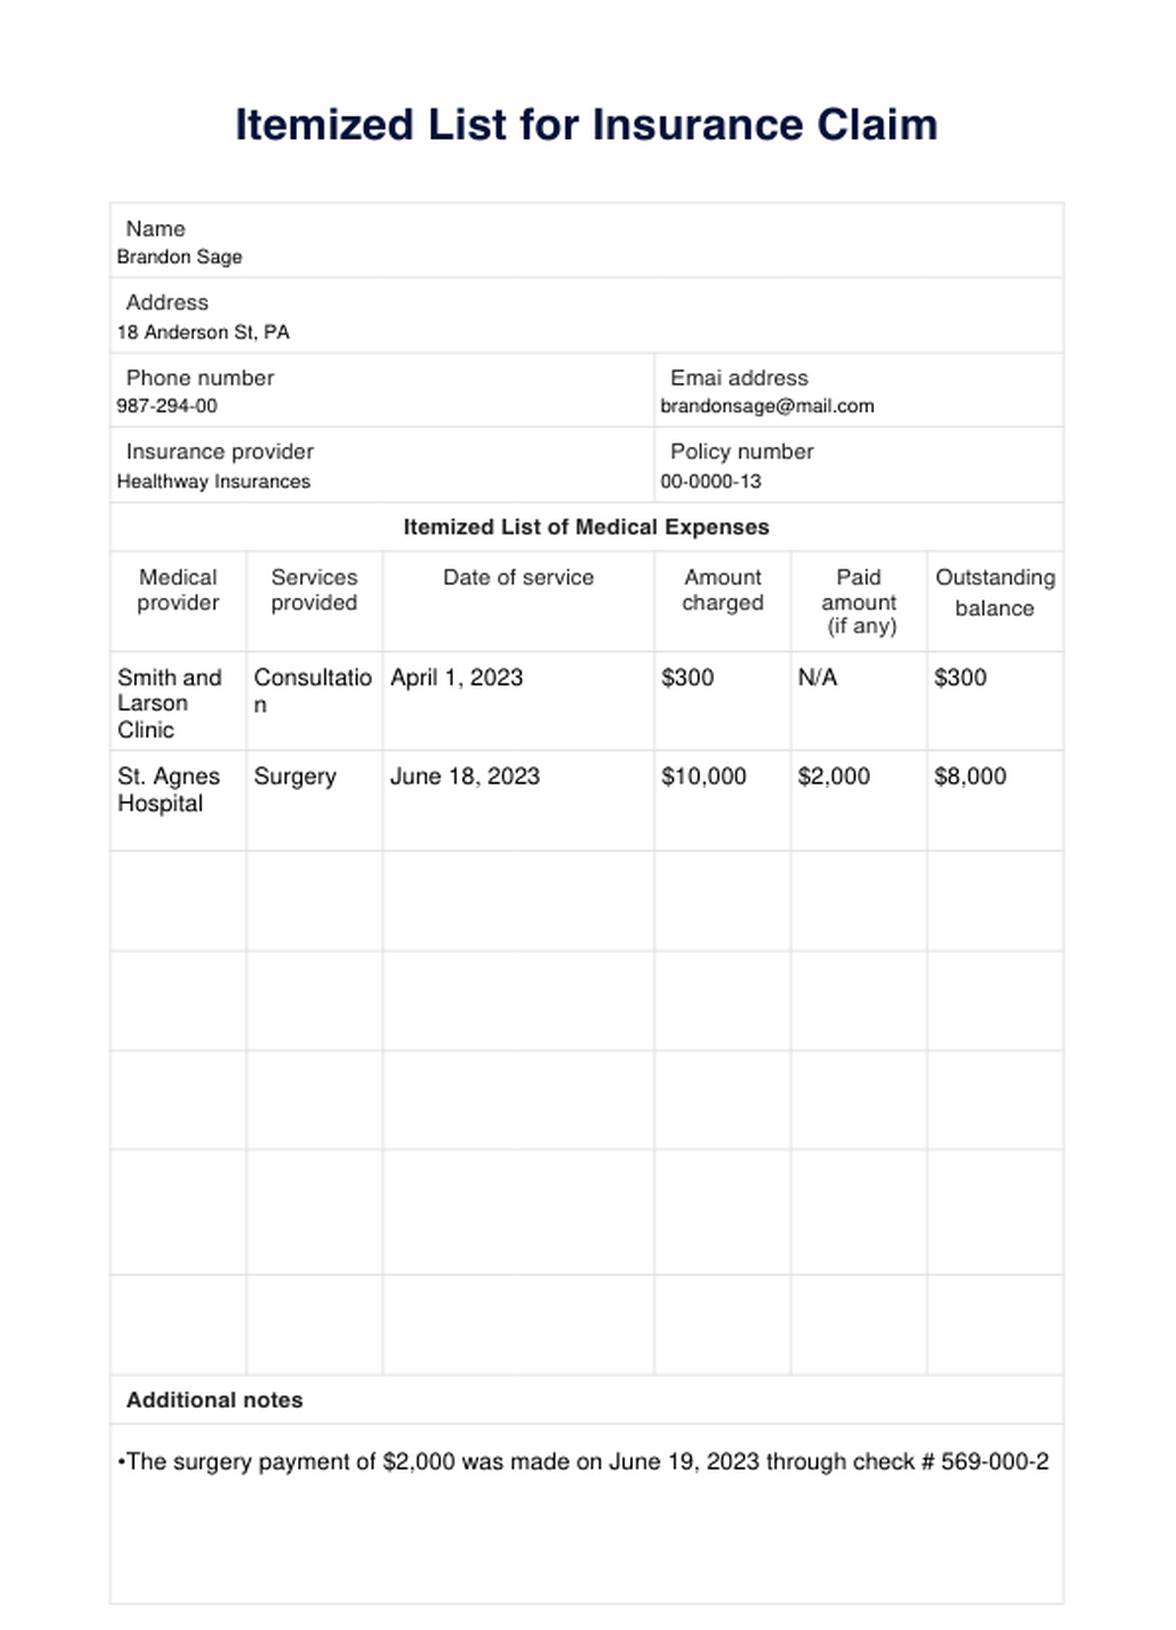 Itemized List For Insurance Claim PDF Example